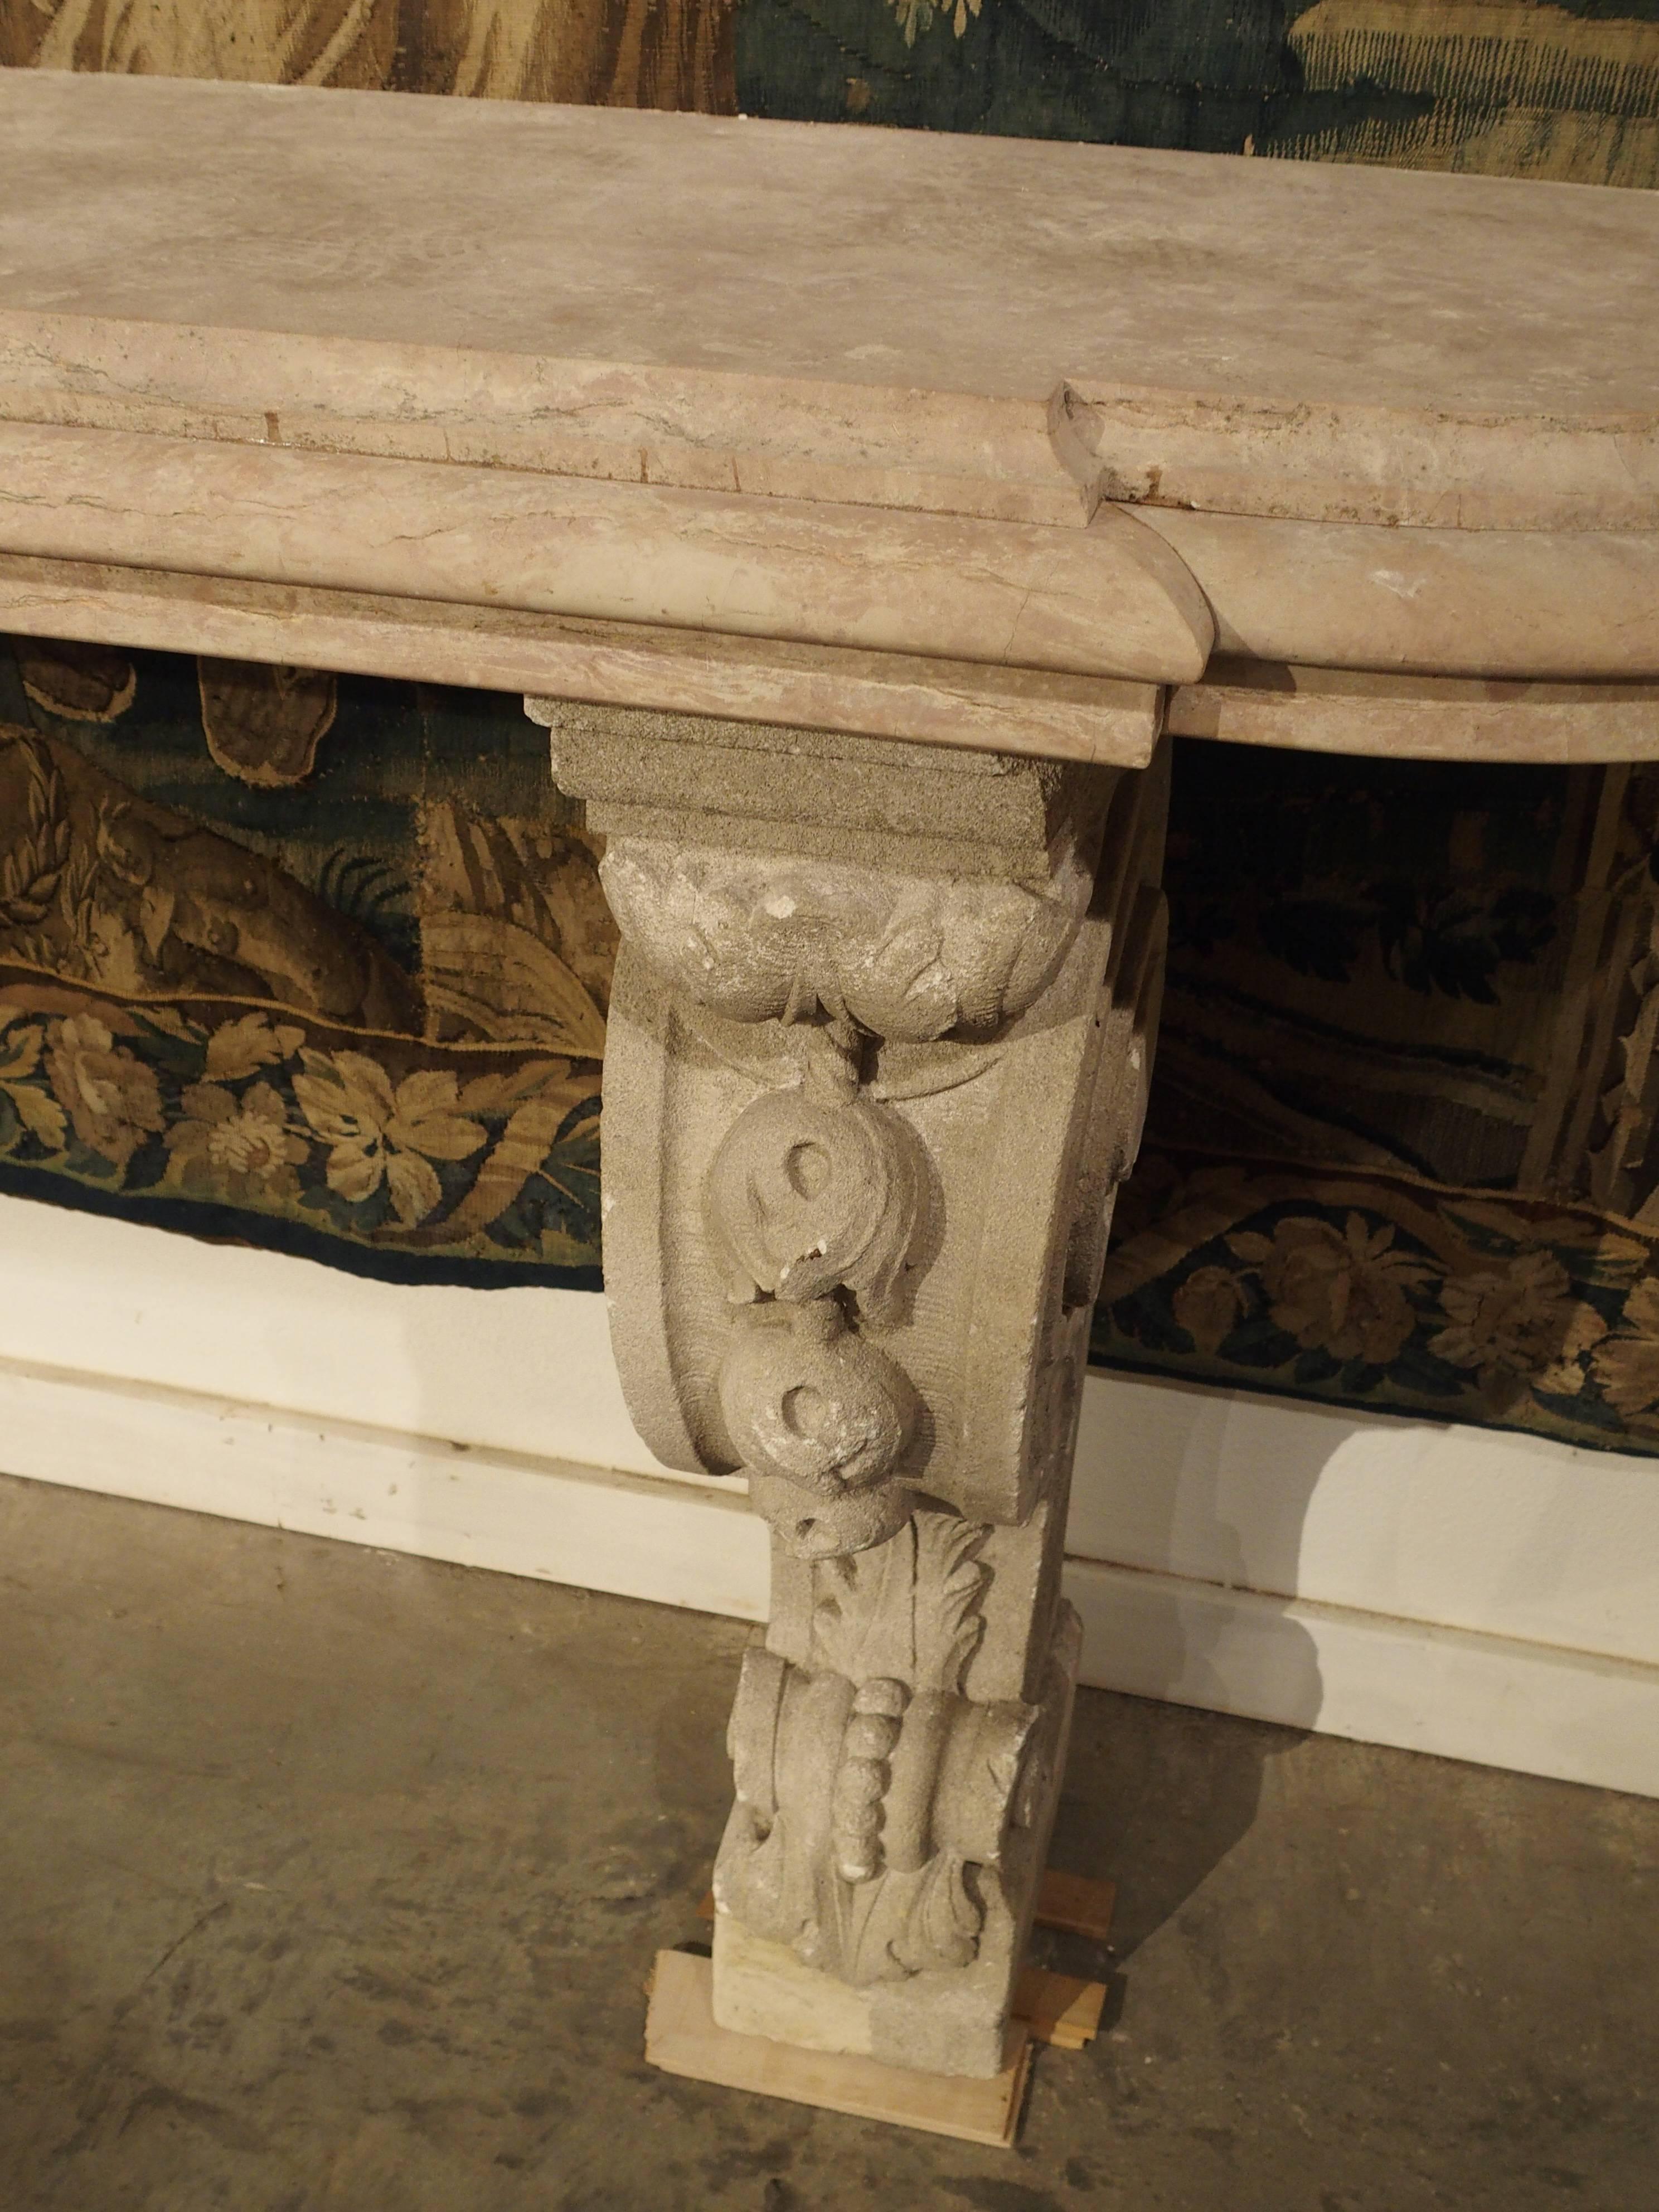 This elegant French honed marble-topped console has stunning, exaggerated and volute shaped legs made of reconstituted stone. There are motifs of acanthus leaves, flowers and beads on the volutes. In France, this console is called a console